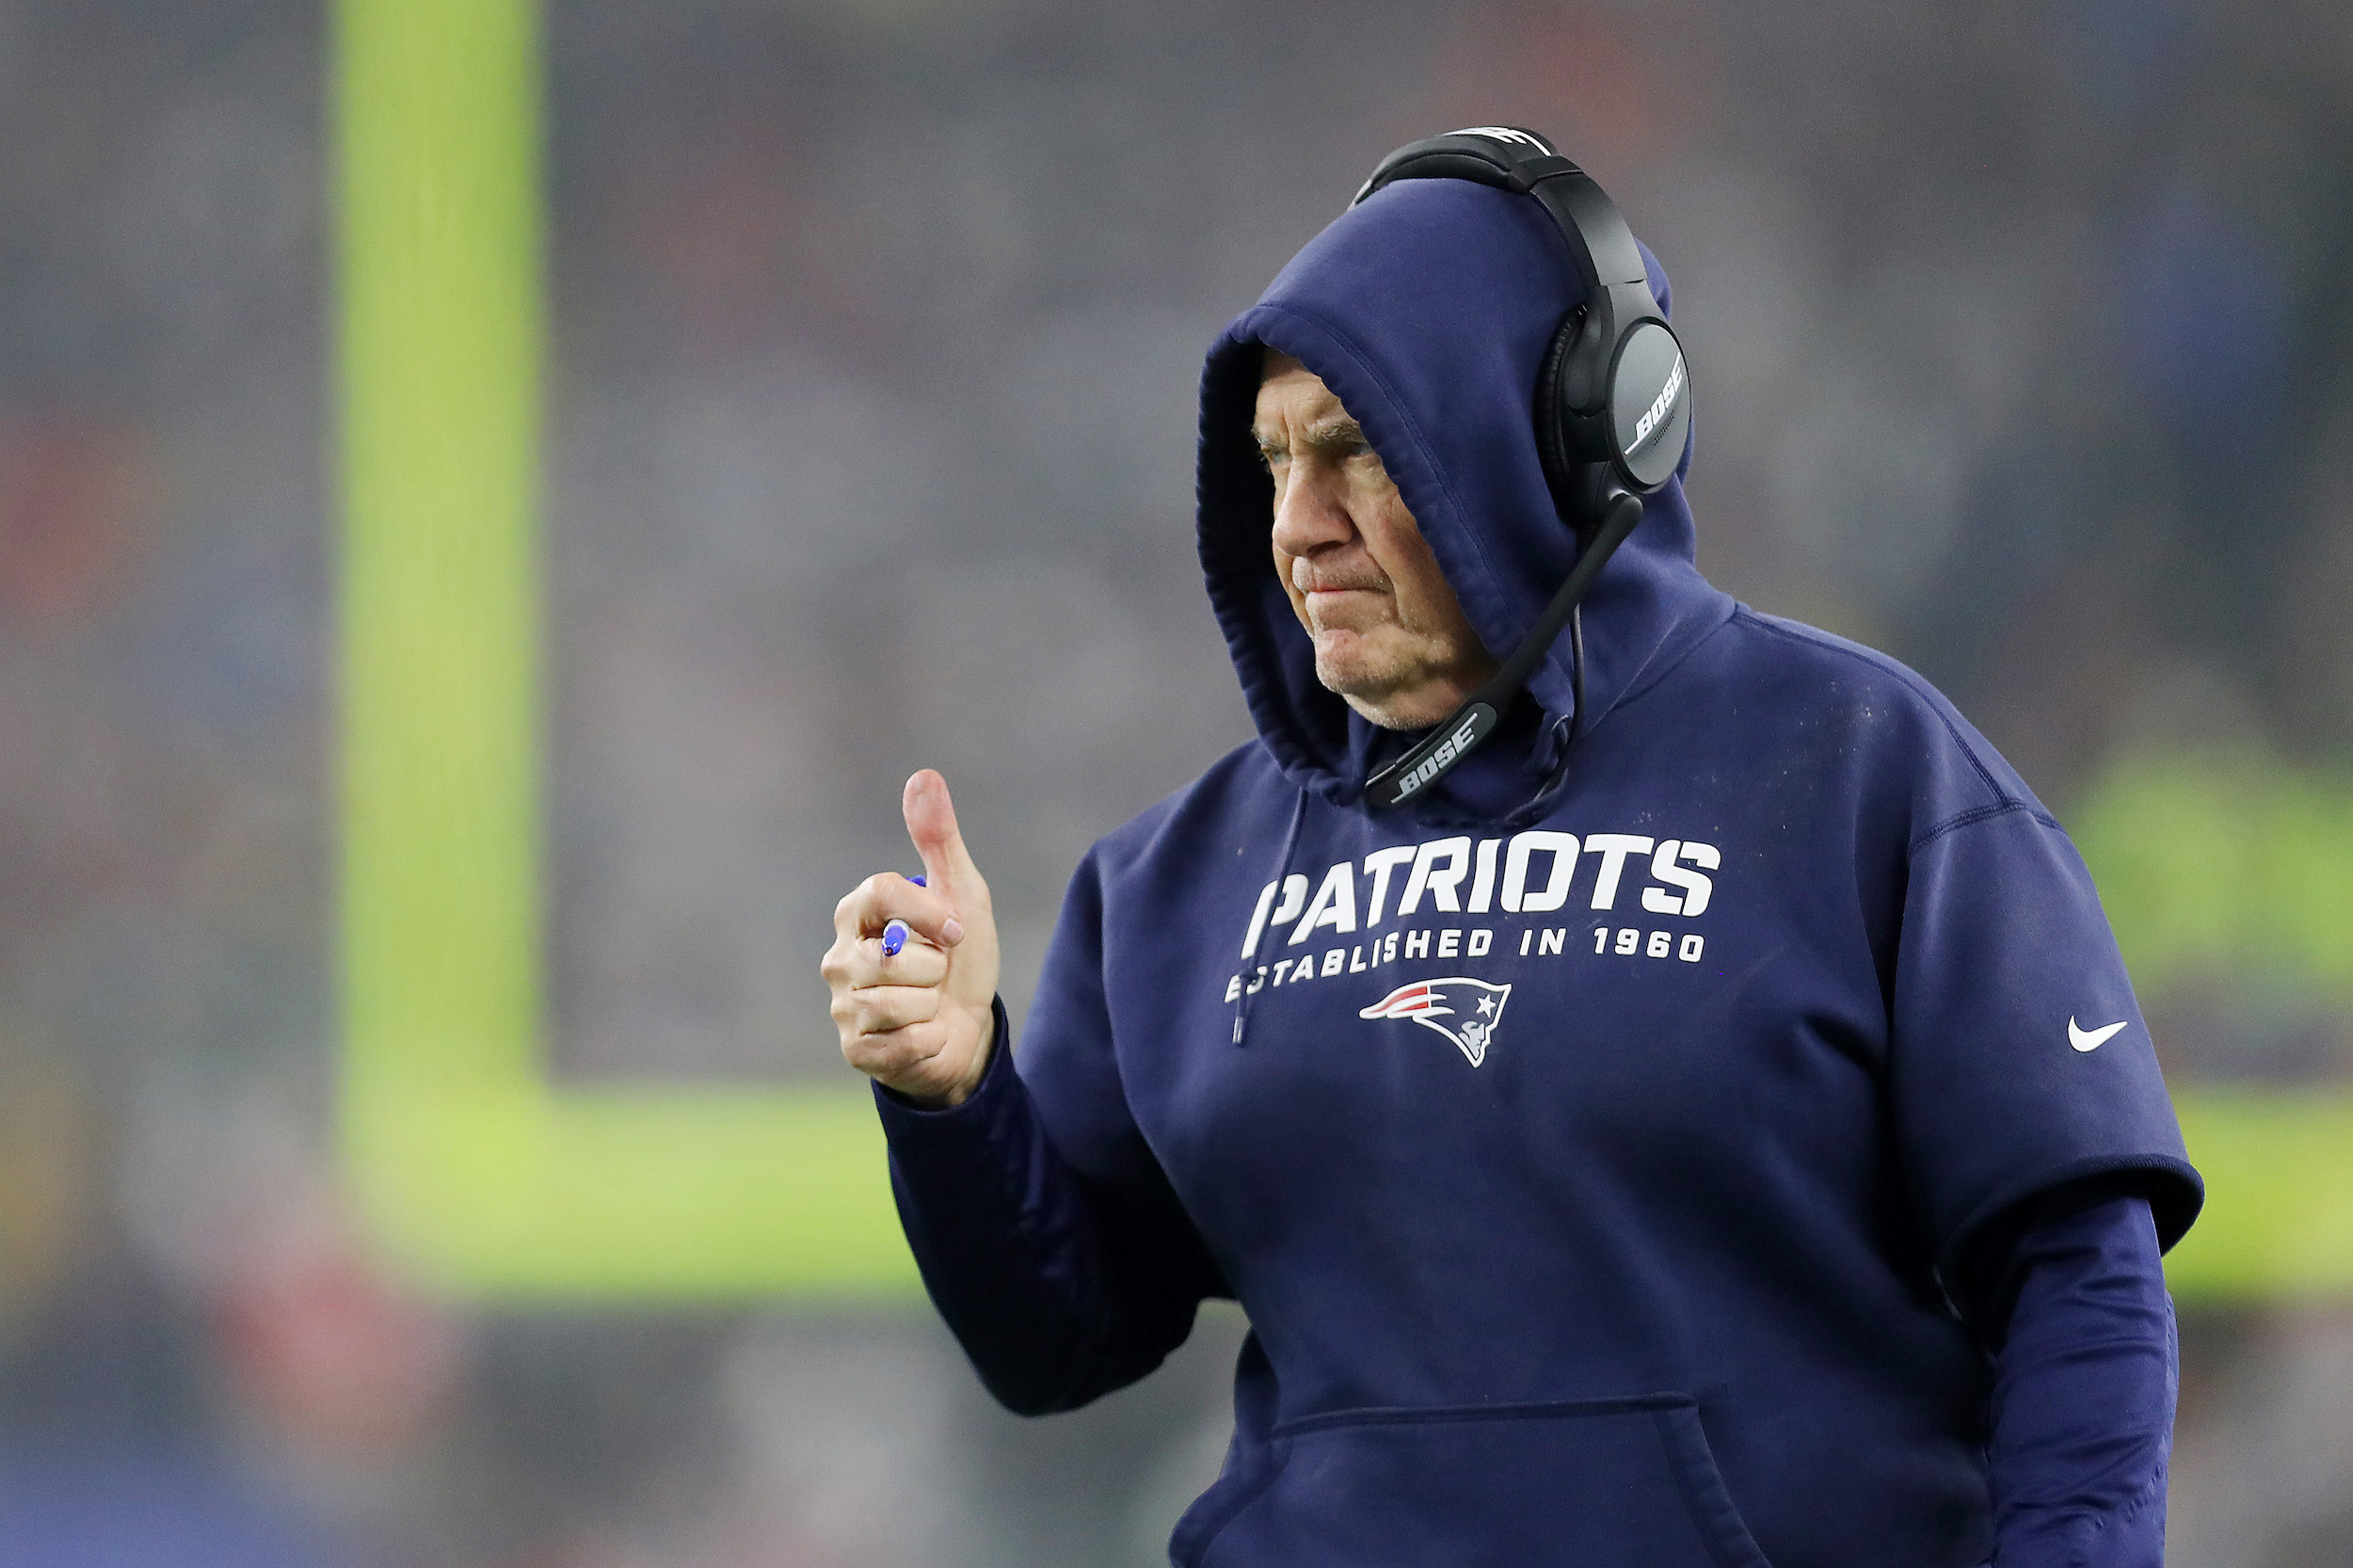 Larry Izzo earned a game ball from Bill Belichick for going to the bathroom without leaving the field.